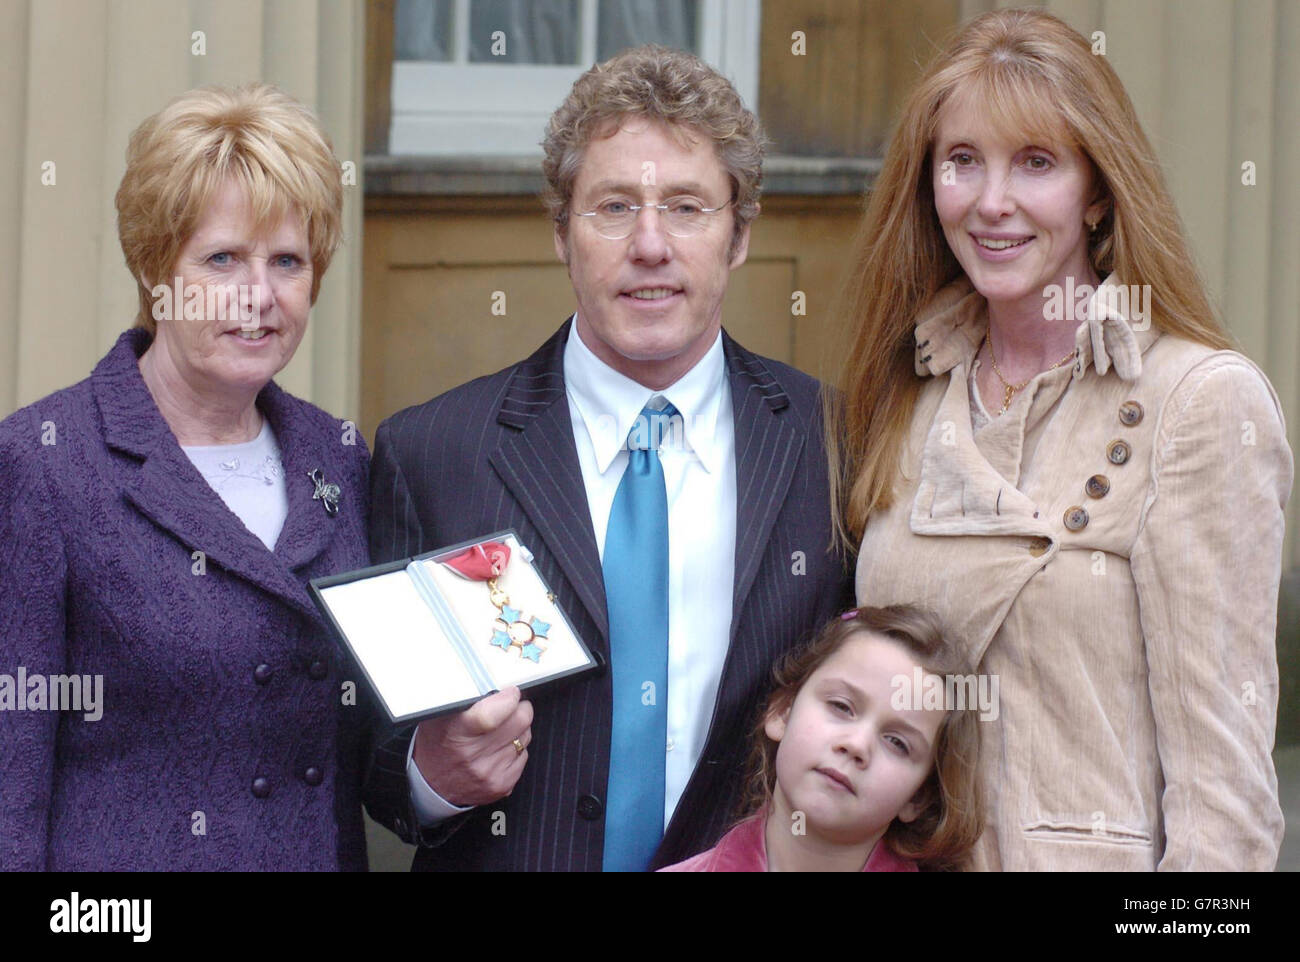 Roger Daltrey from the The Who poses with his wife Heather (right), sister Jill Dale (left) and grand-daughter Lily, 6. Stock Photo